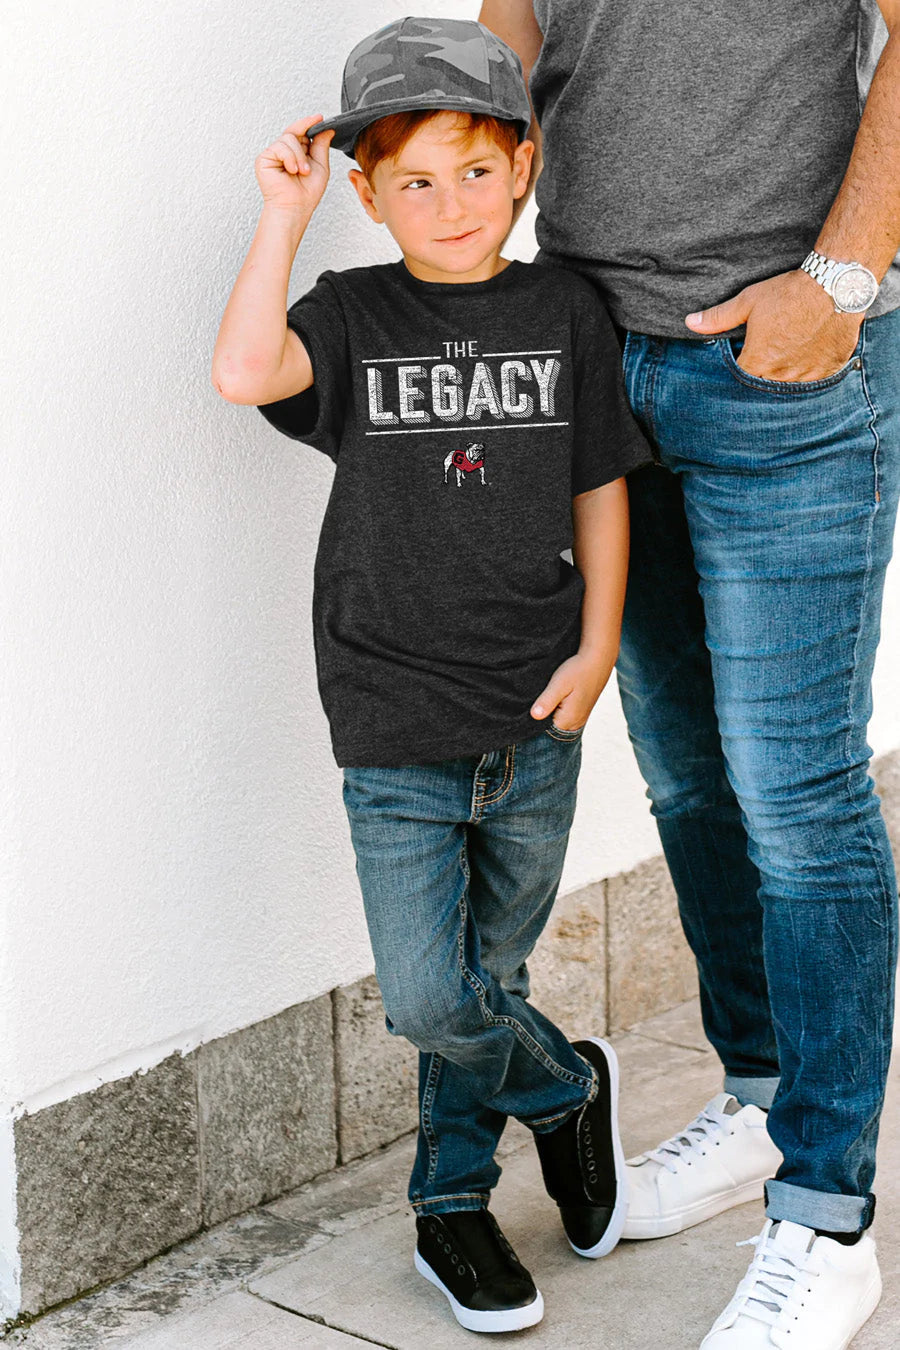 Youth "The Legacy" Tee